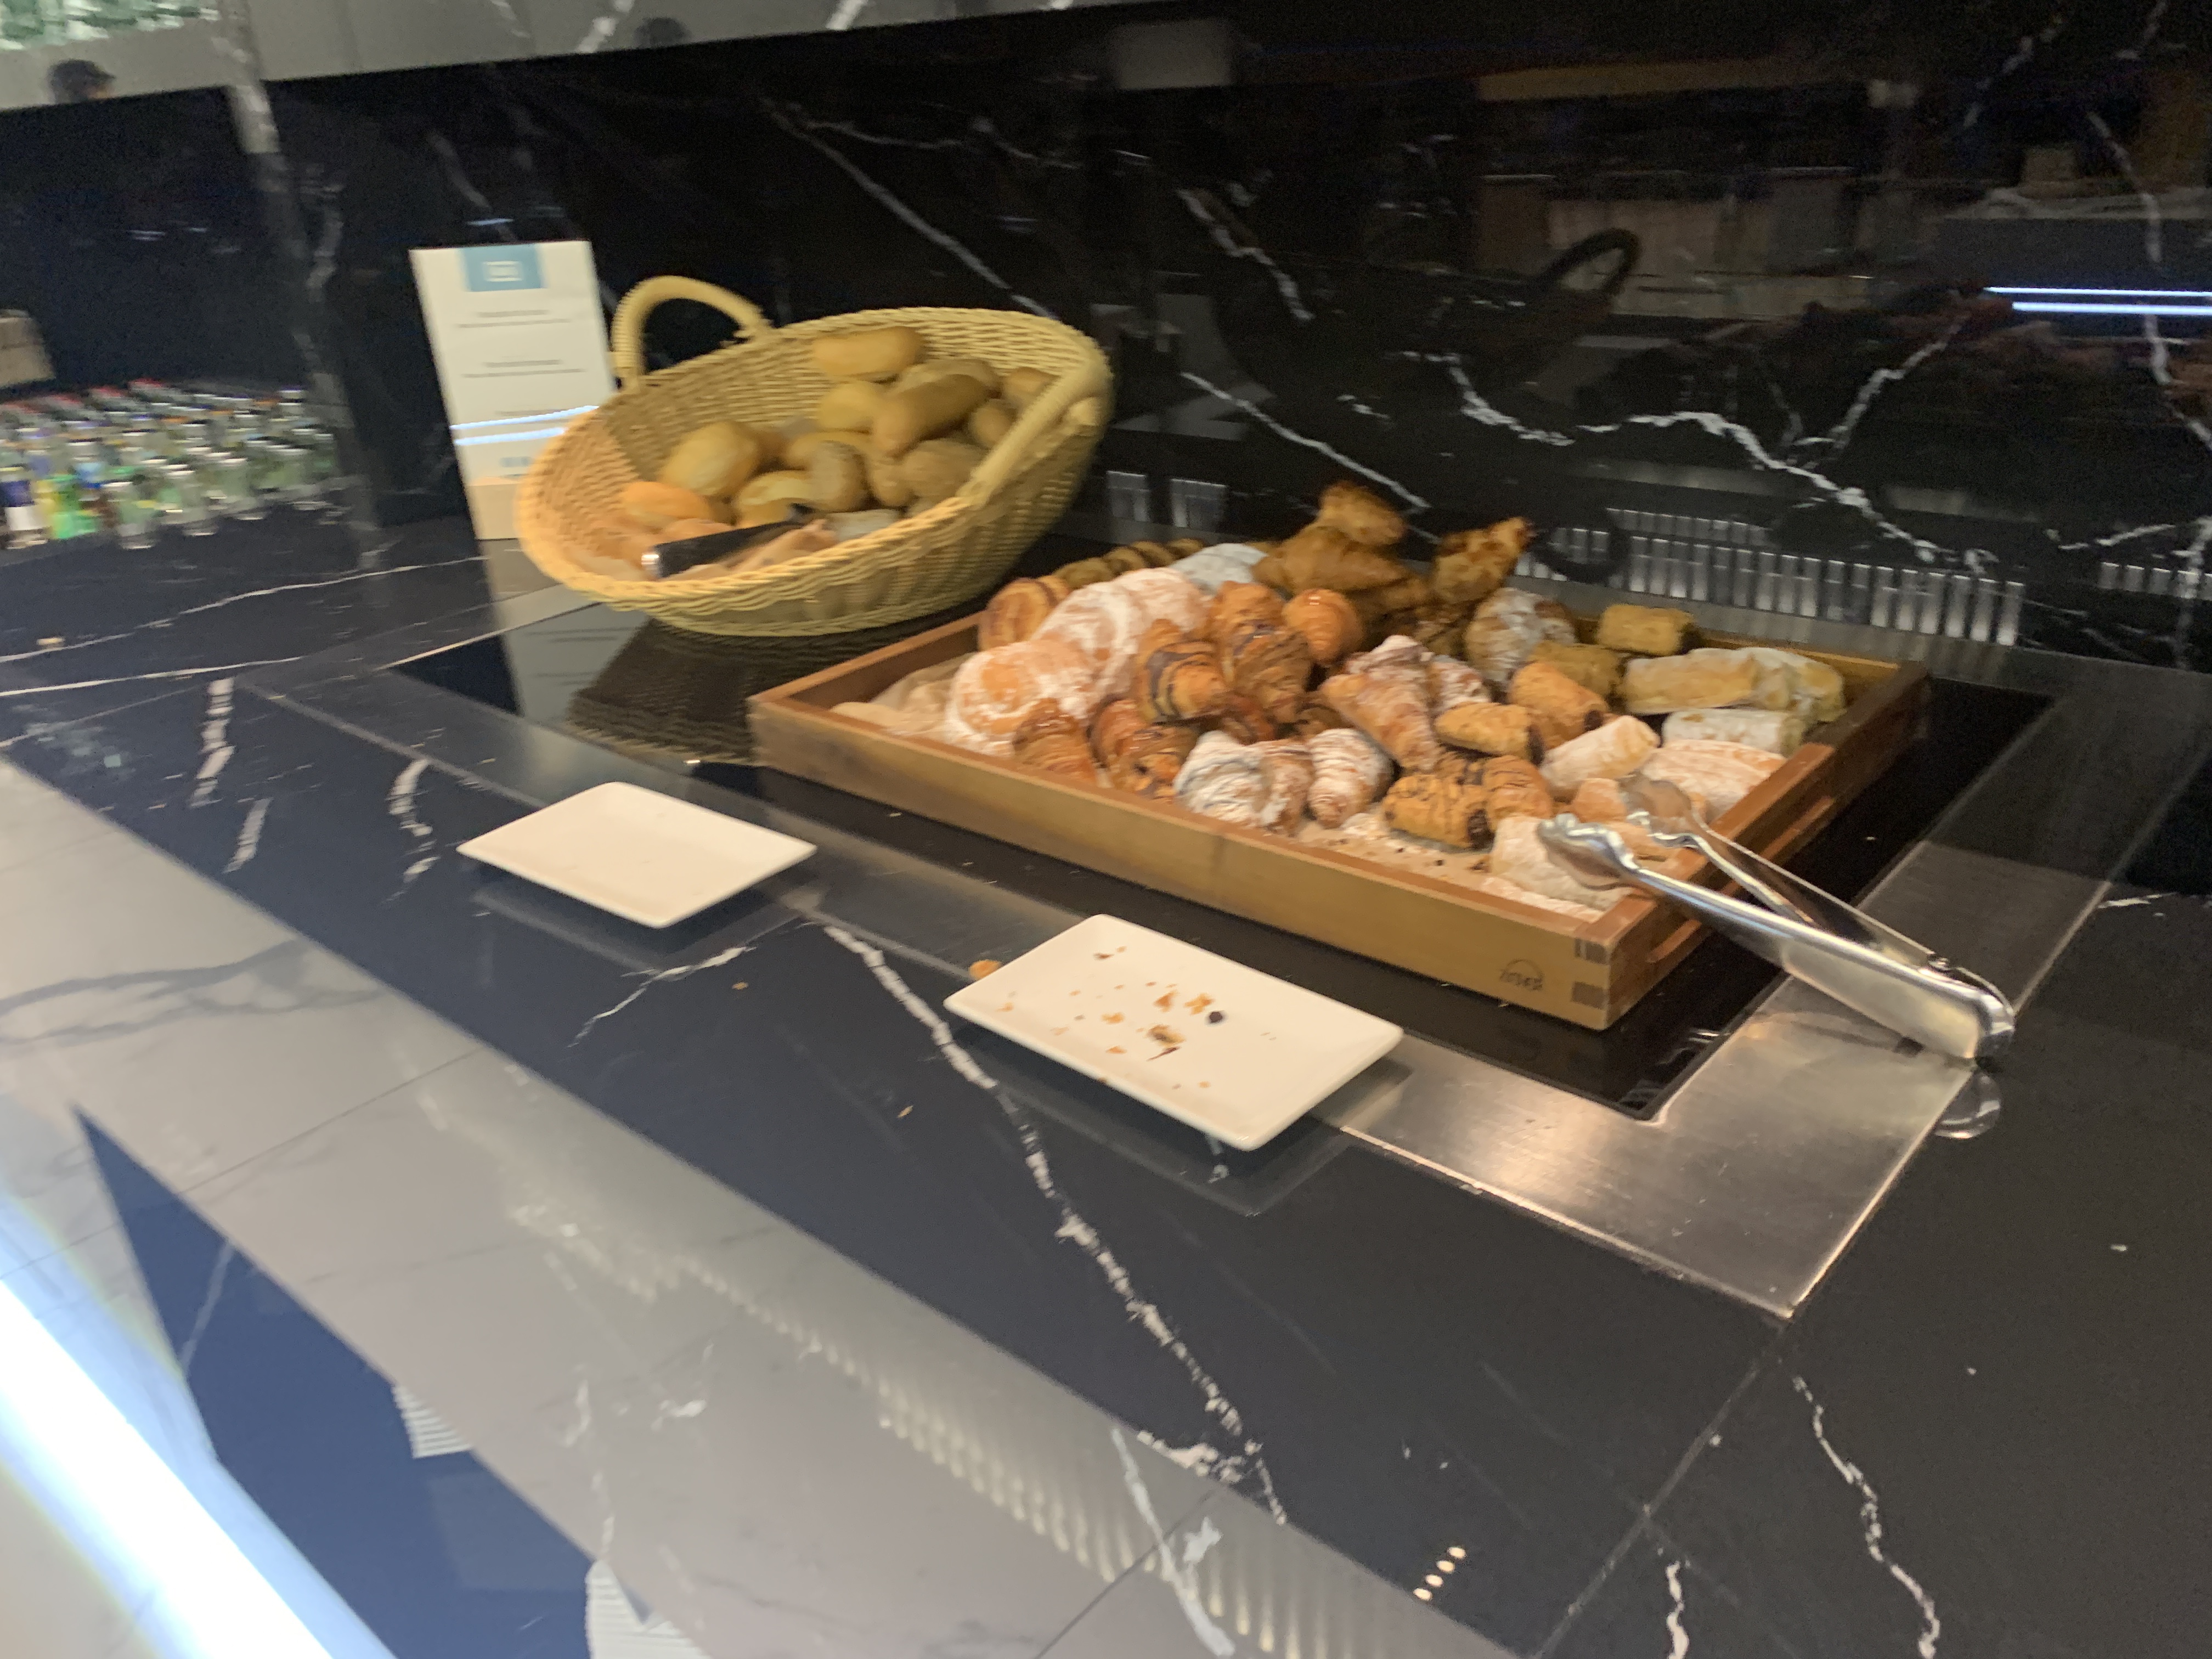 a tray of pastries and a basket of bread on a counter